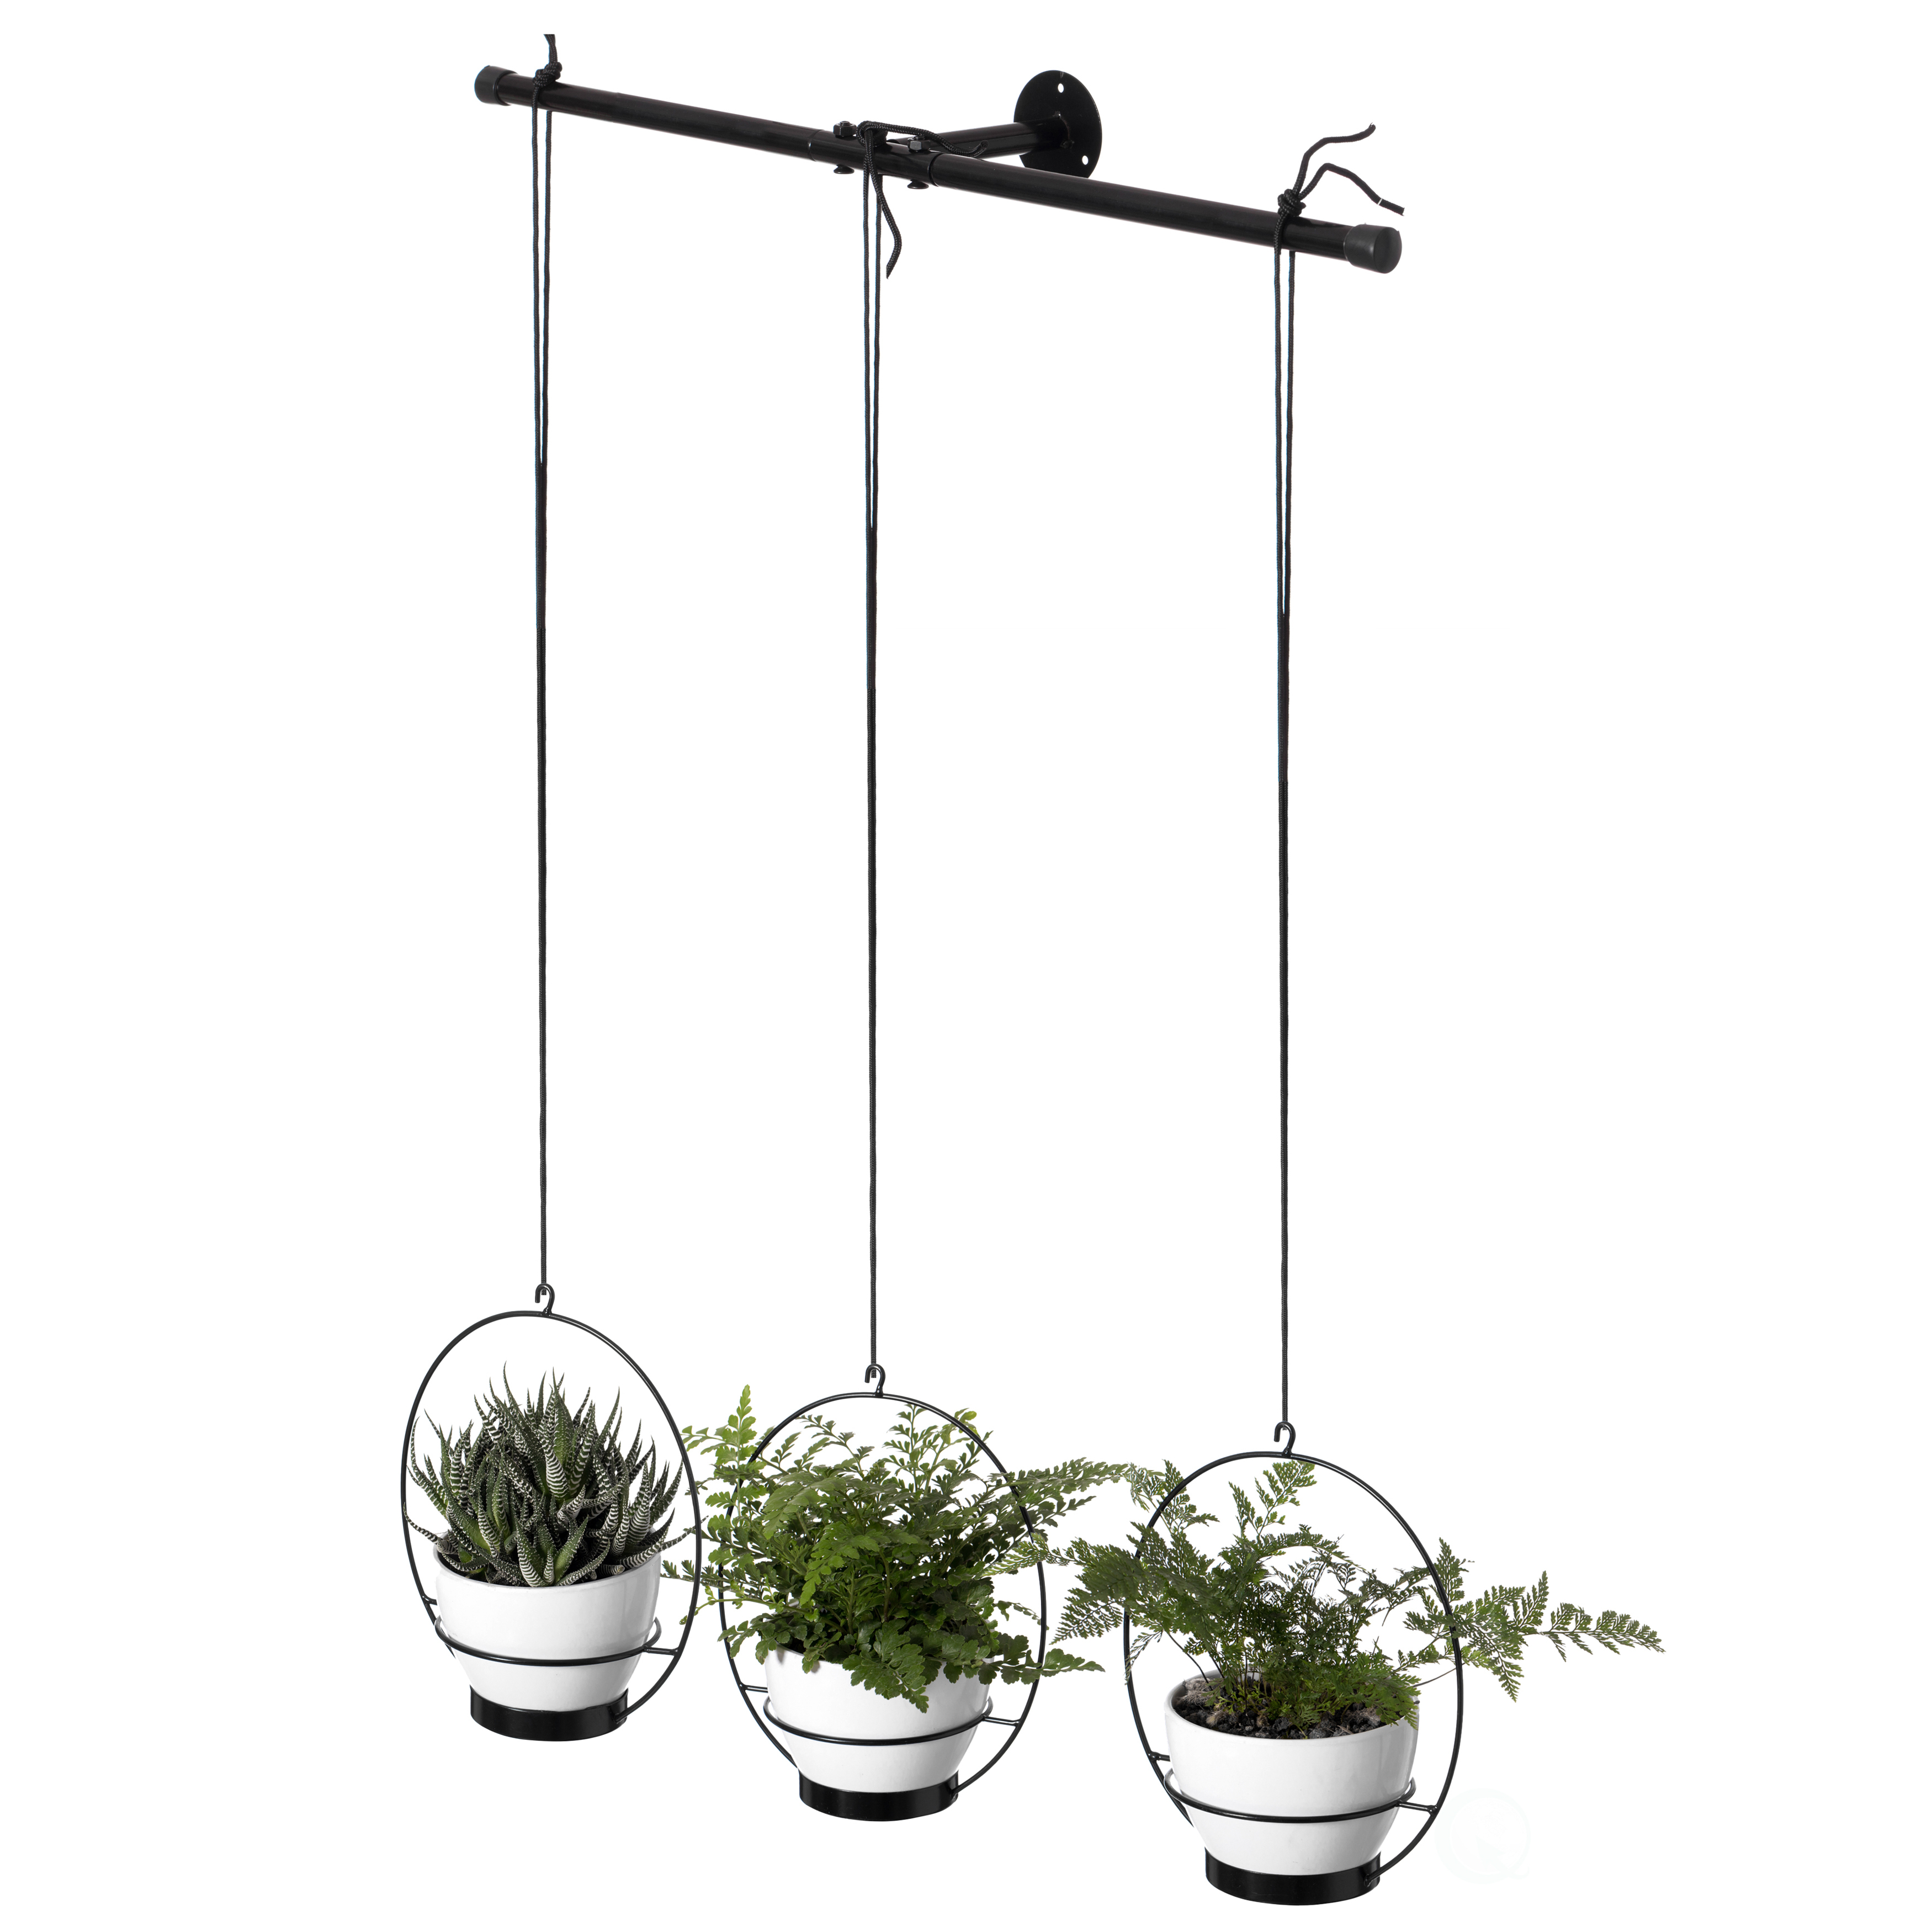 Decorative Metal Hanging Planter with Tree Pots for Flowers, White and Black